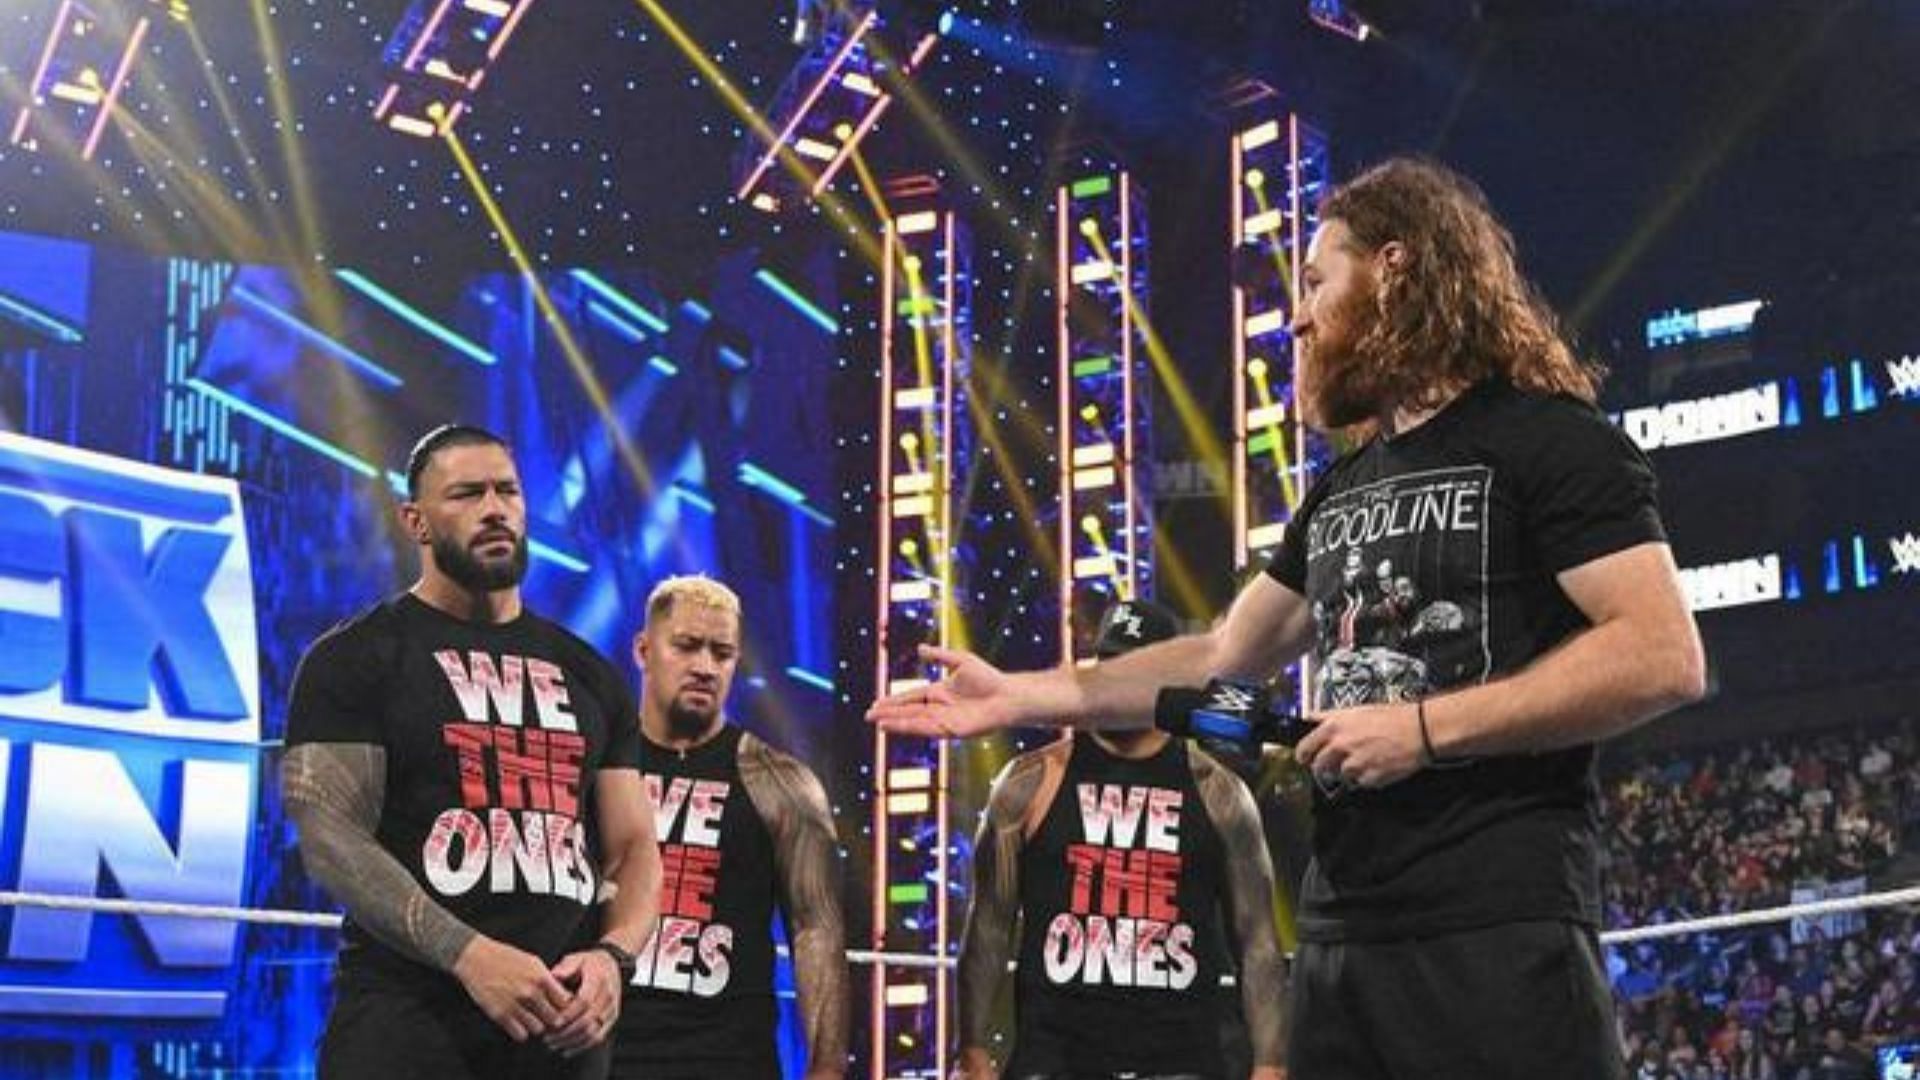 Sami Zayn was declared as the Honorary Uce of The Bloodline by Roman Reigns